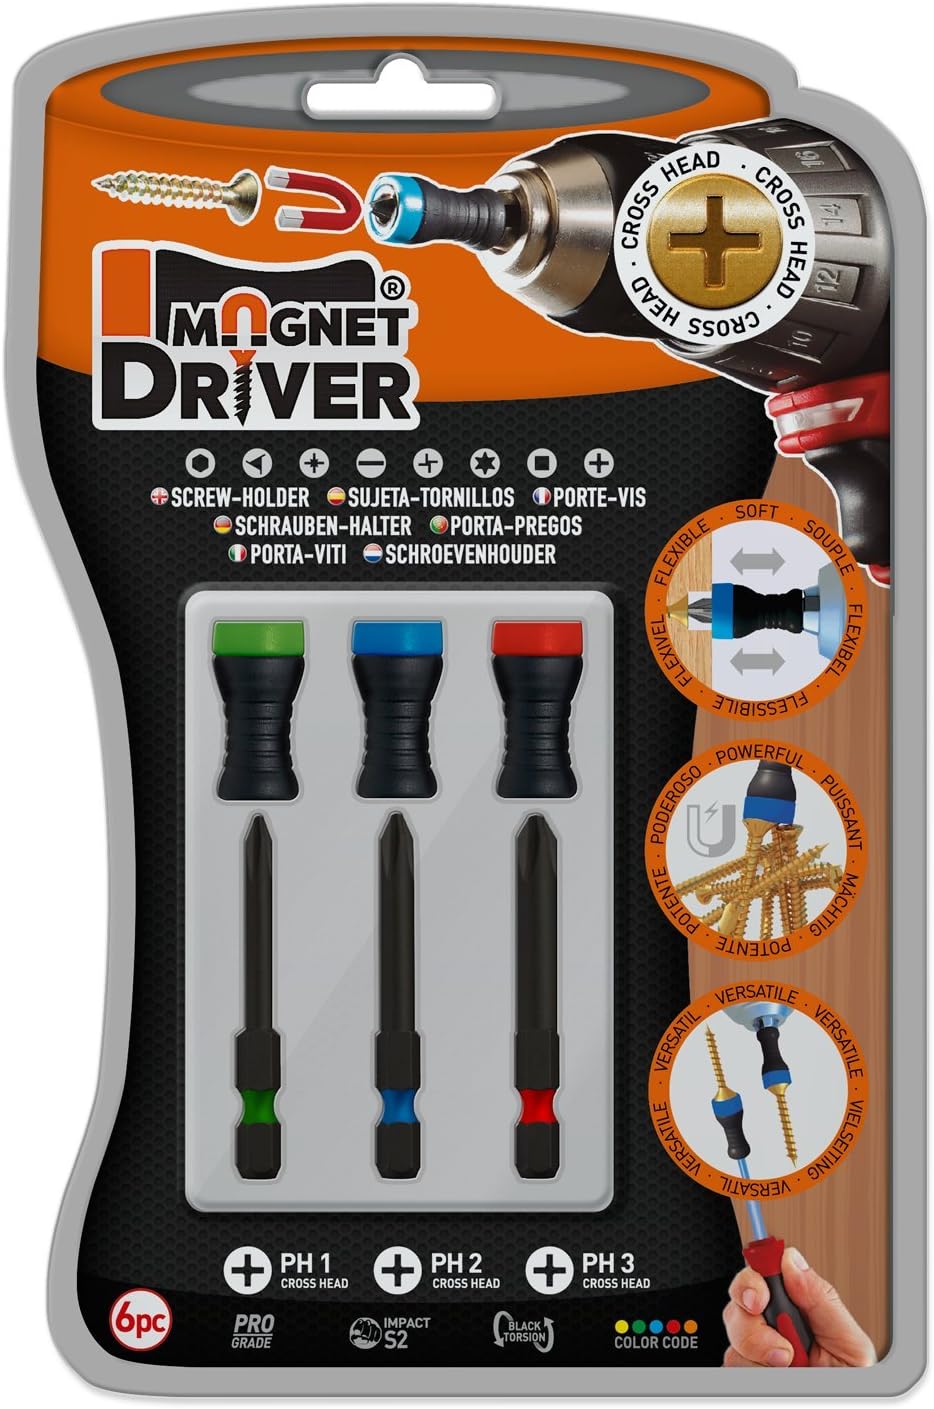 Magnet Driver Screw-Holder 6 Piece Set RRP 14.99 CLEARANCE XL 4.99